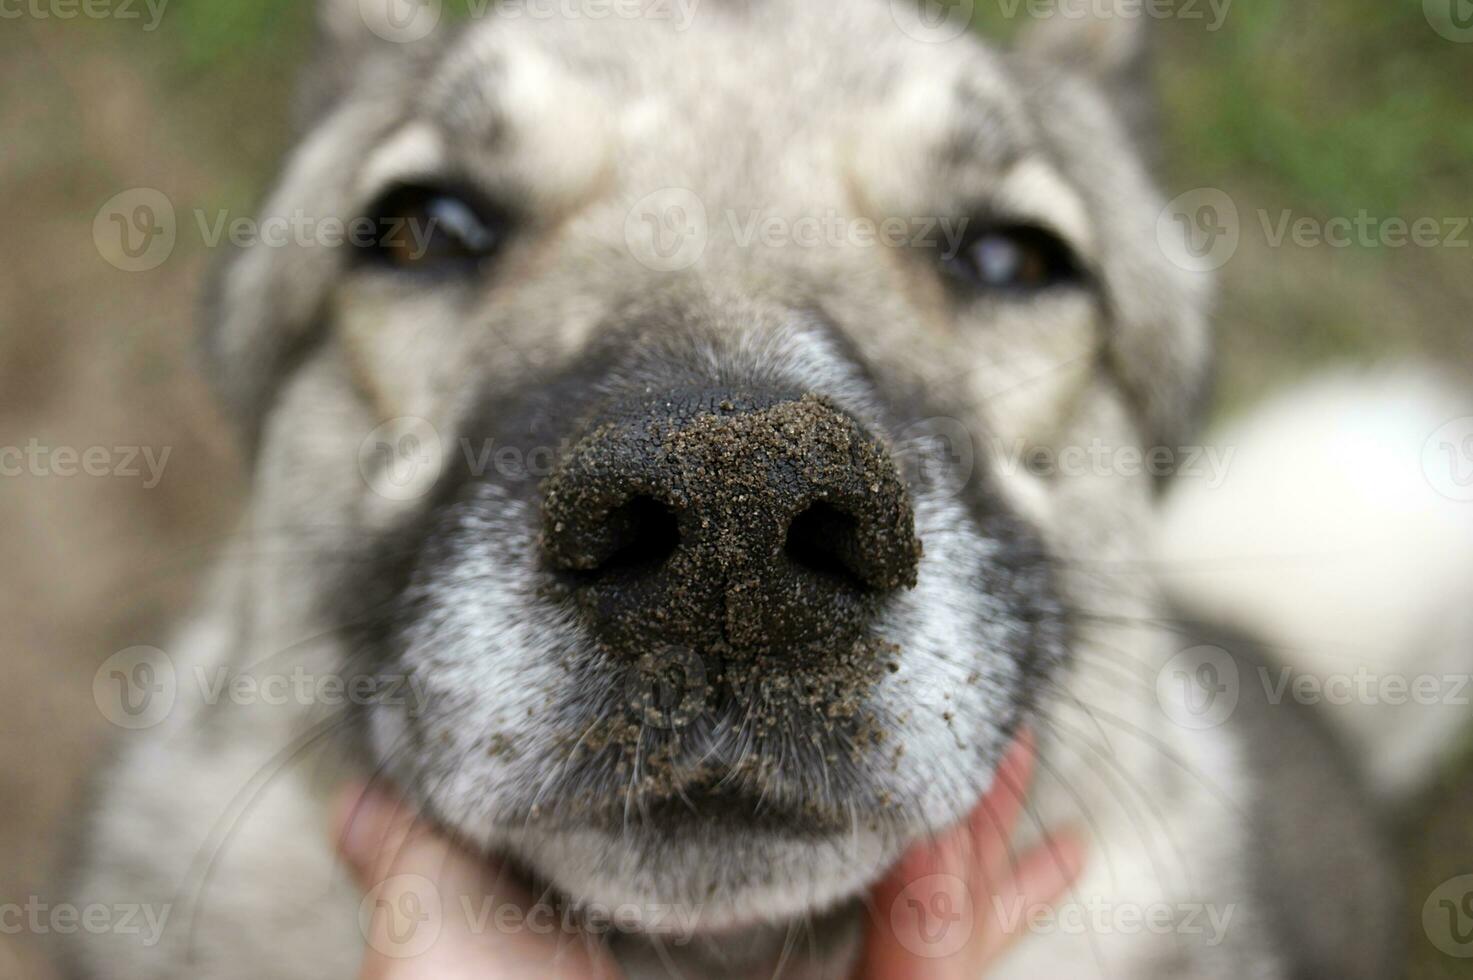 West siberian grey Laika with dirty nose. Selective focus on nose, Shallow depth of field. photo